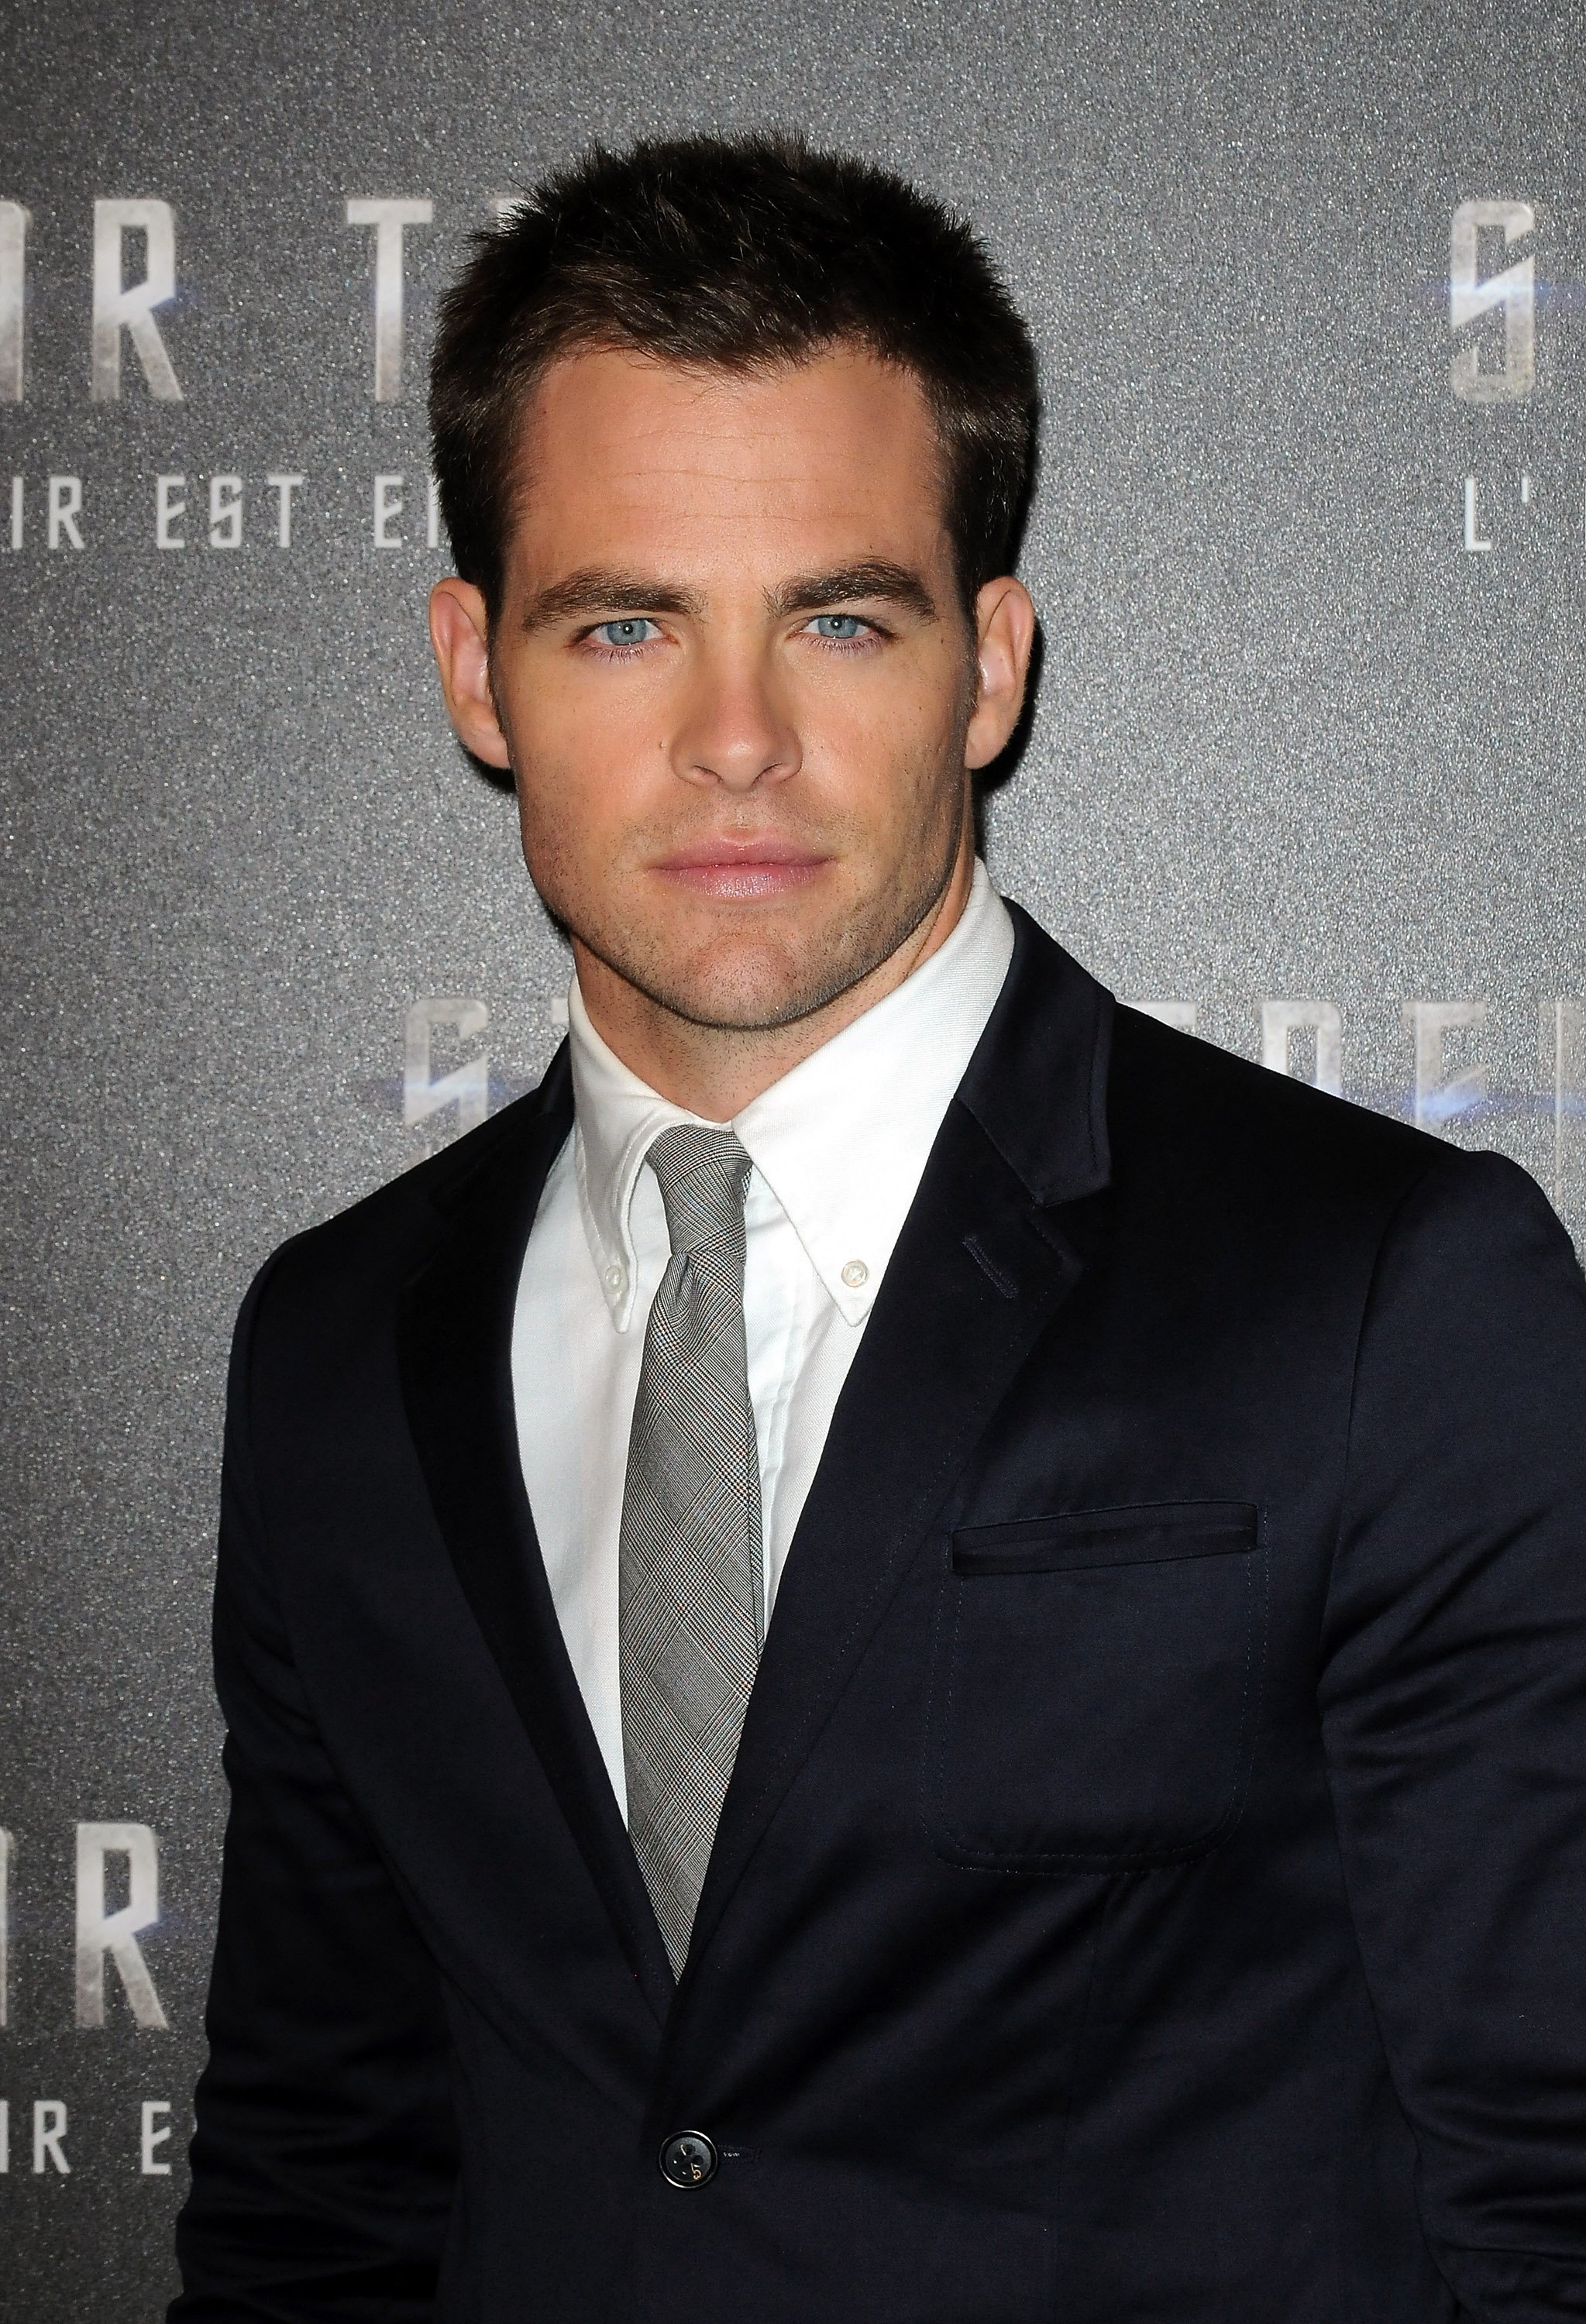 Actor Chris Pine attends a Star Trek press conference at Hotel Park Hyatt on April 14, 2009 in Paris, France. | Source: Getty Images